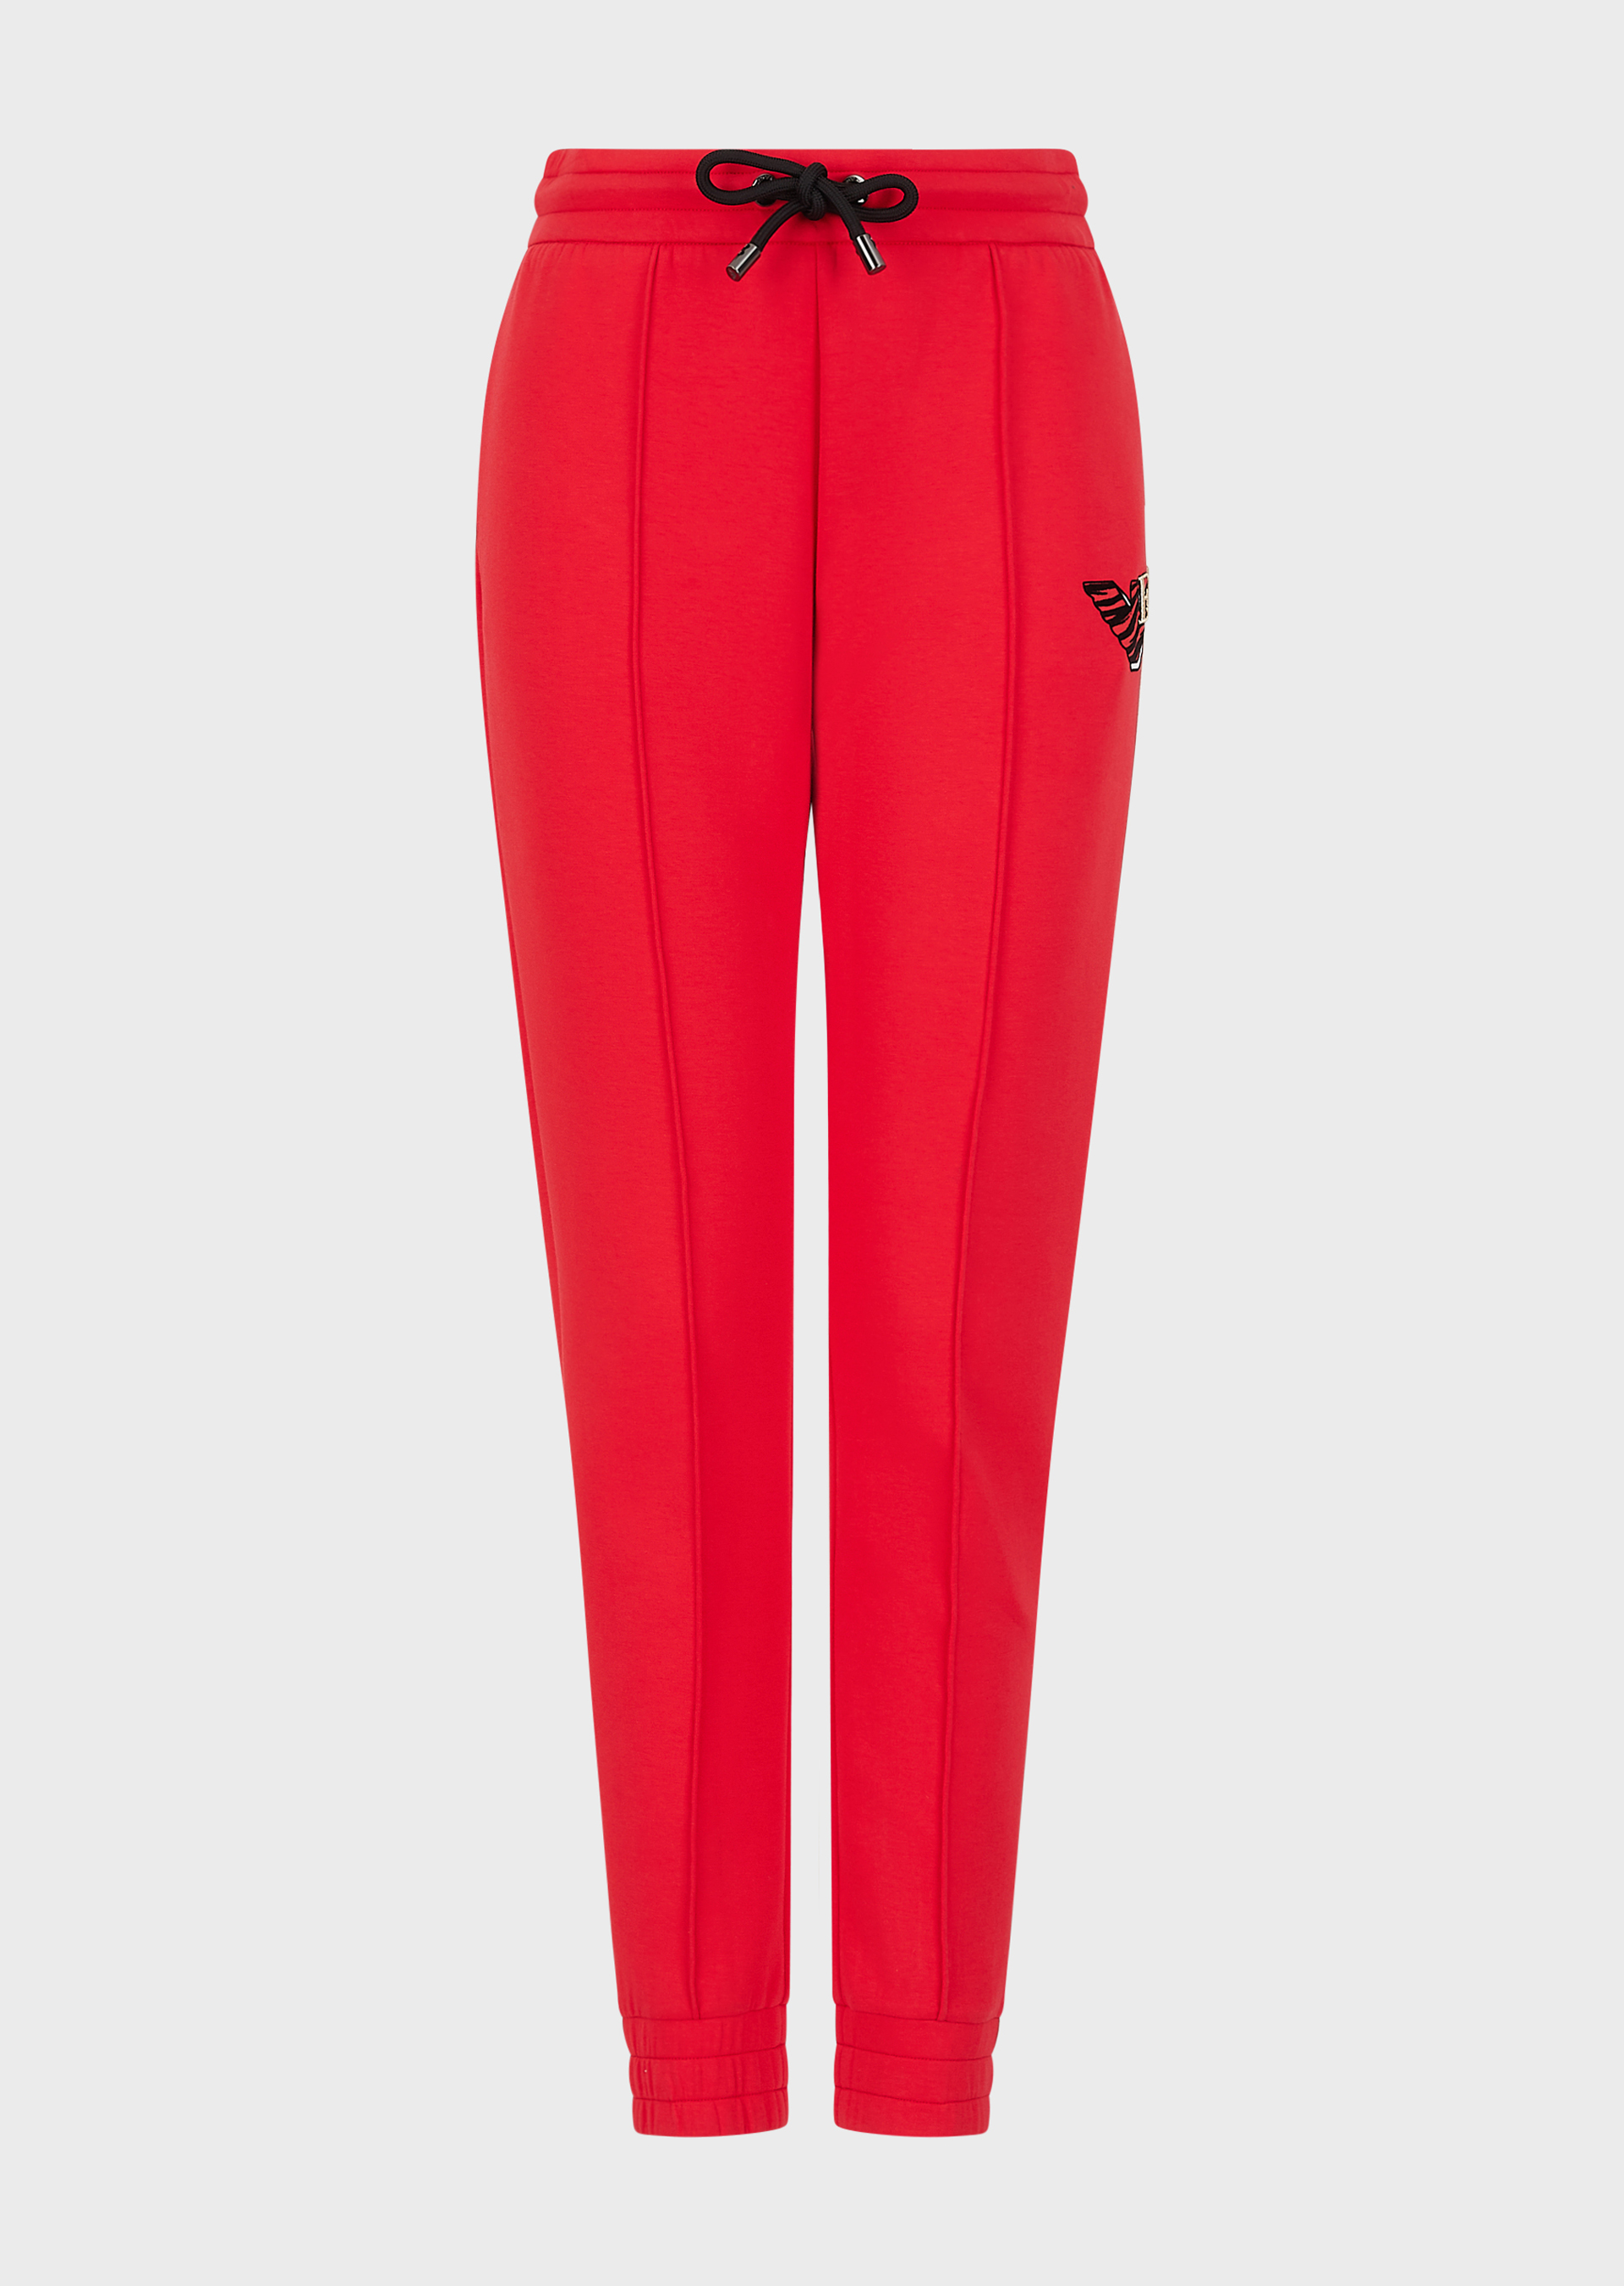 Emporio Armani Chinese New Year Capsule jogging pants